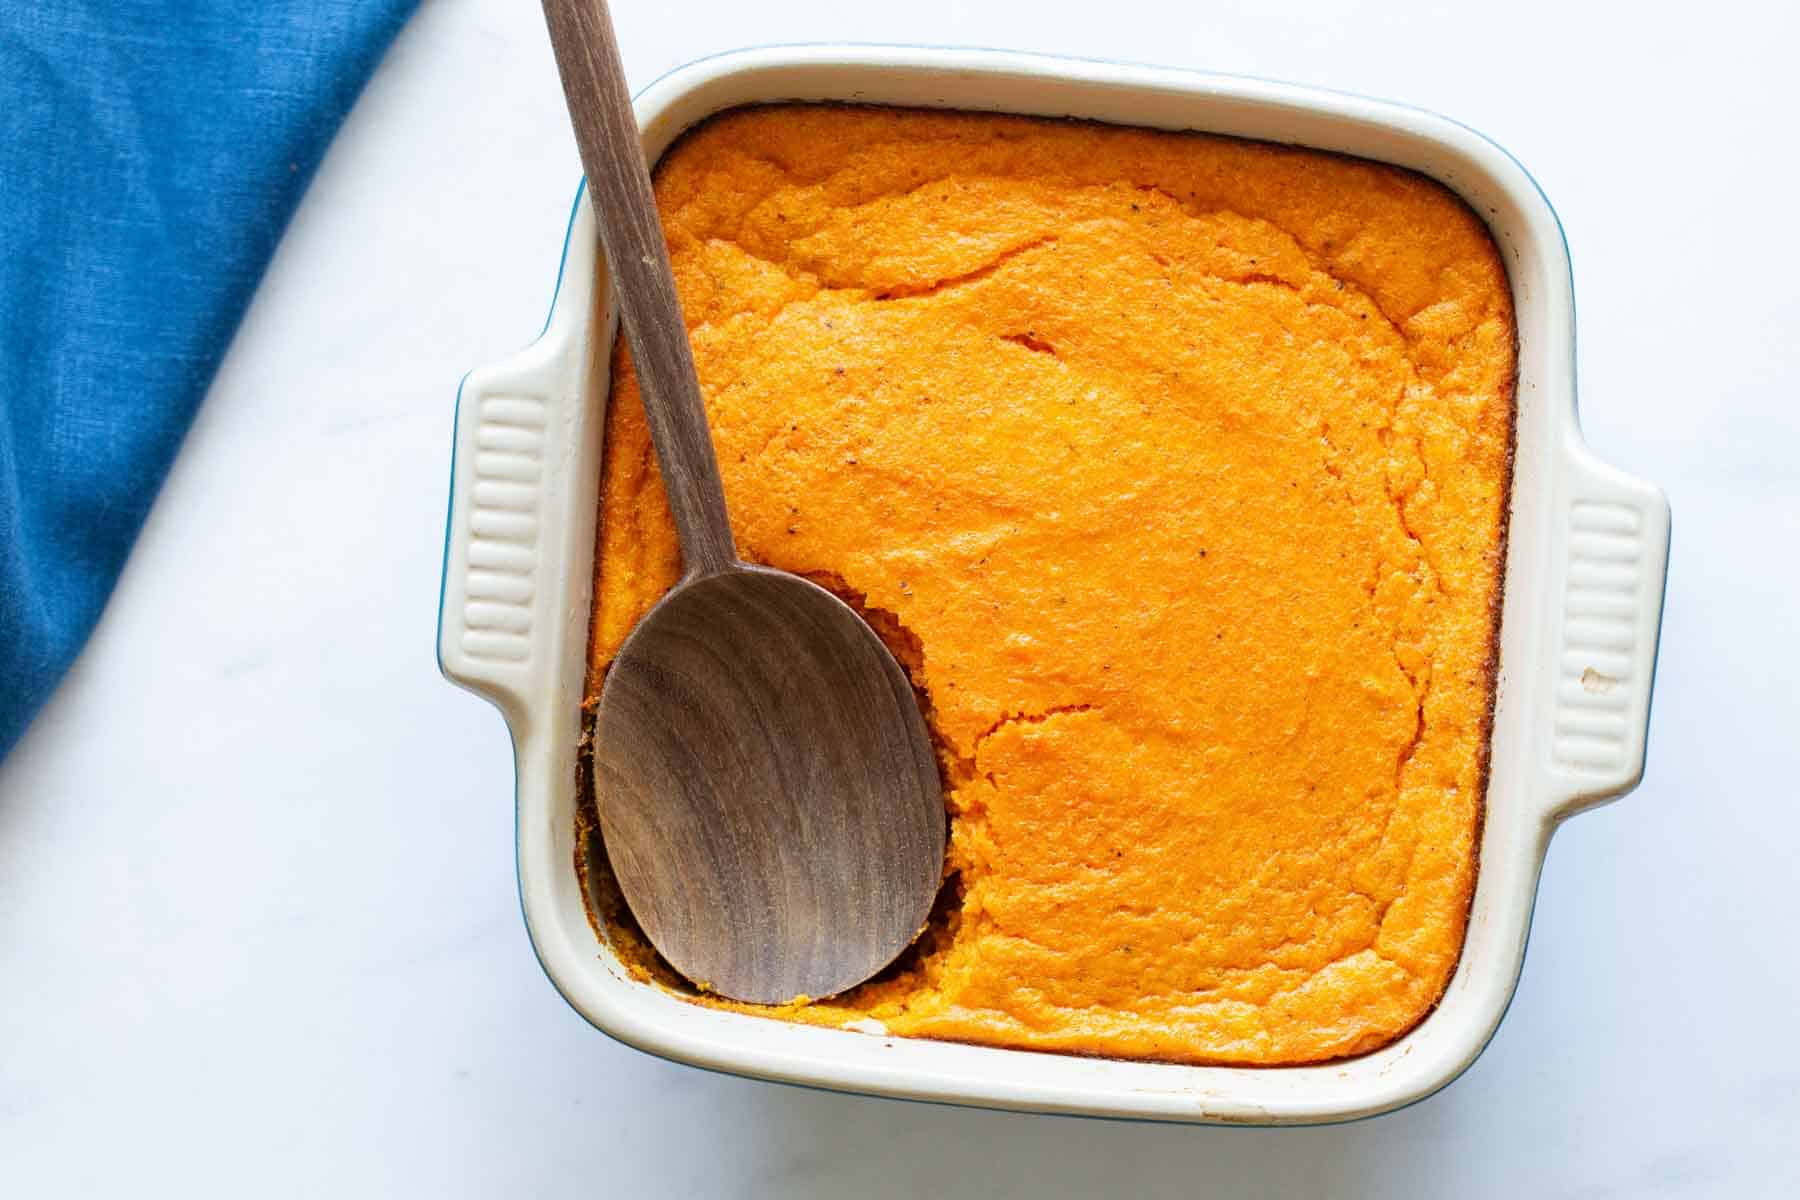 Freshly baked carrot souffle in a square dish with a wooden spoon.